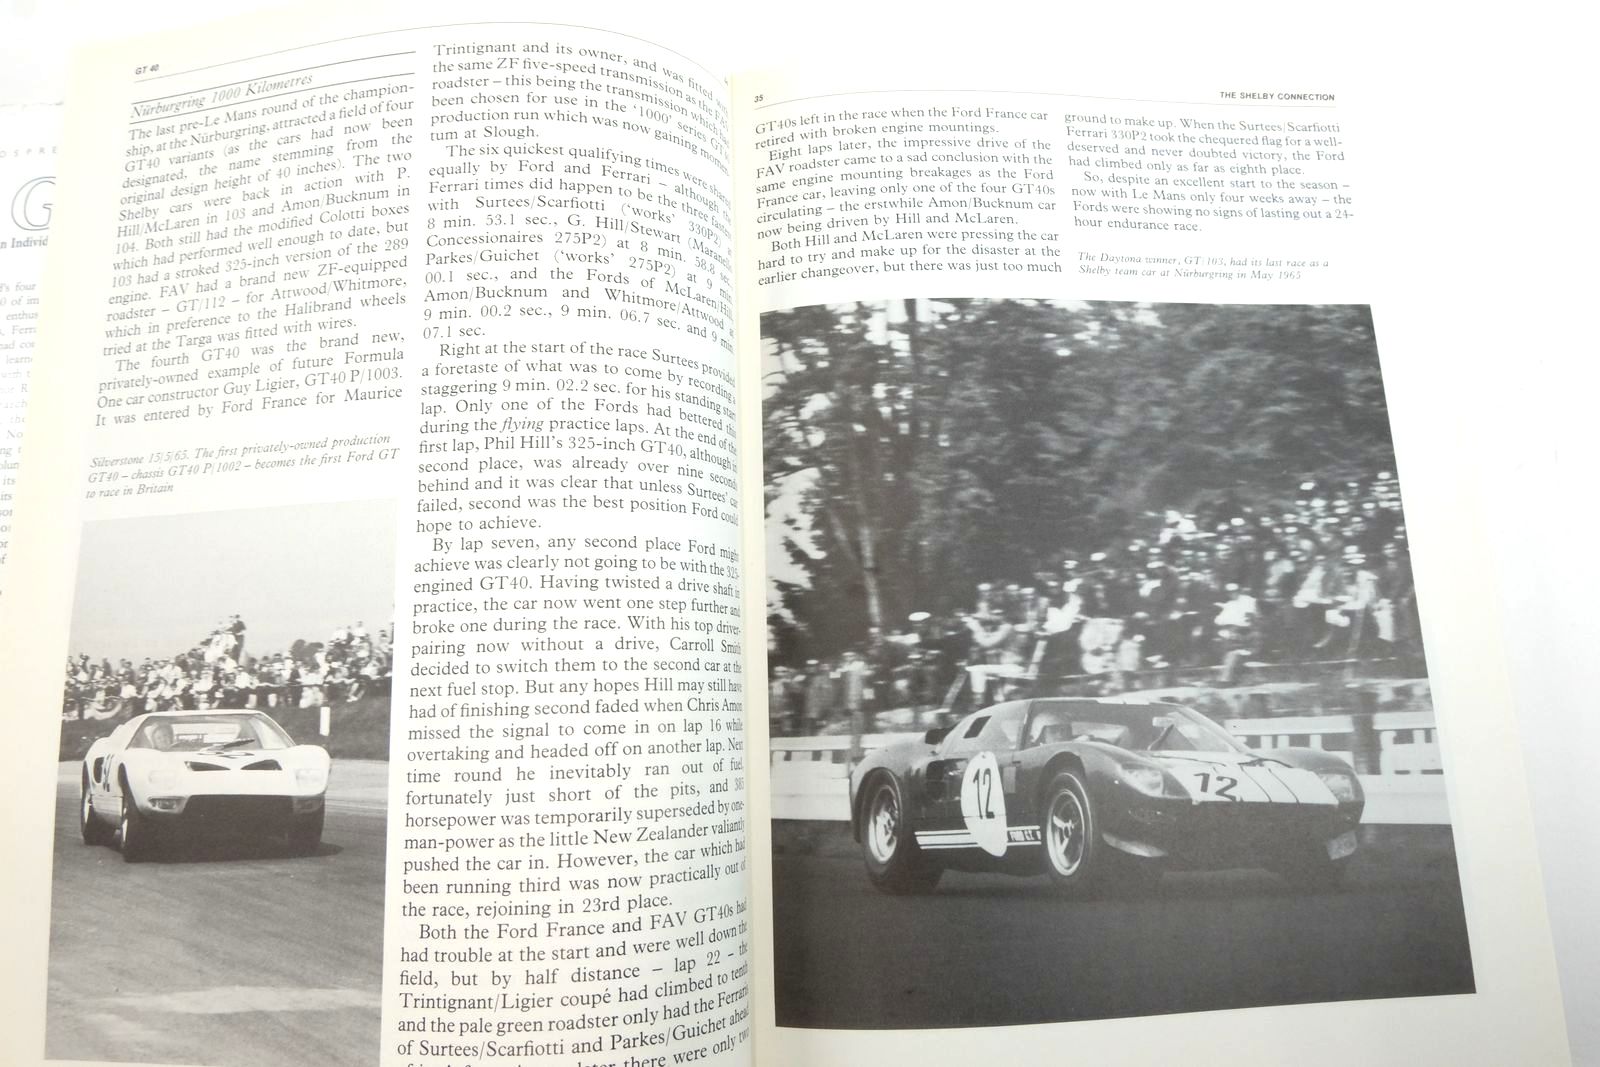 Photo of GT40: AN INDIVIDUAL HISTORY AND RACE RECORD written by Spain, Ronnie published by Osprey Publishing (STOCK CODE: 2136505)  for sale by Stella & Rose's Books